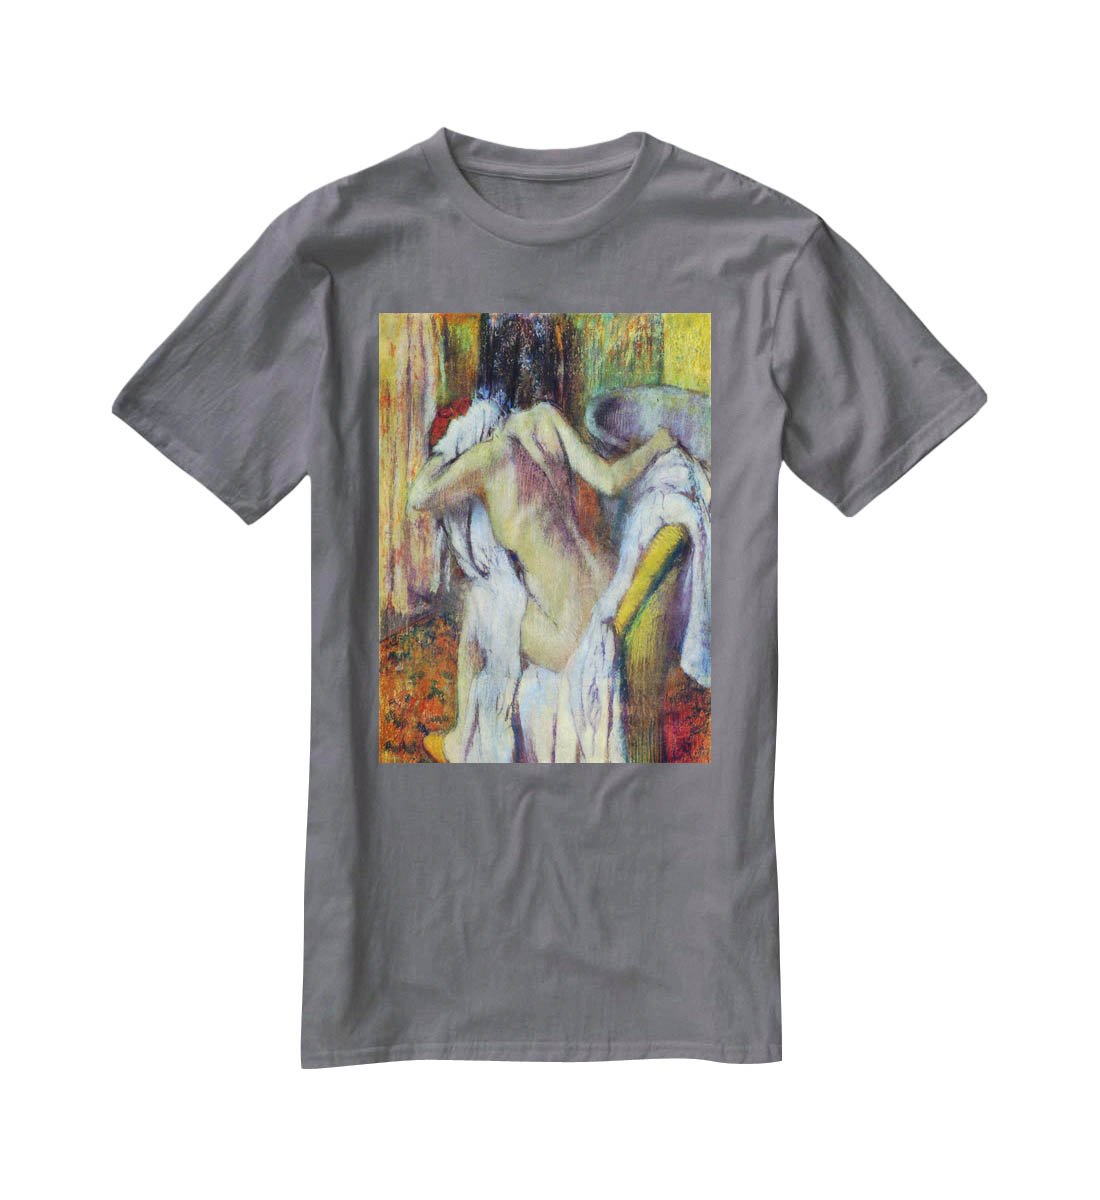 After Bathing 4 by Degas T-Shirt - Canvas Art Rocks - 3